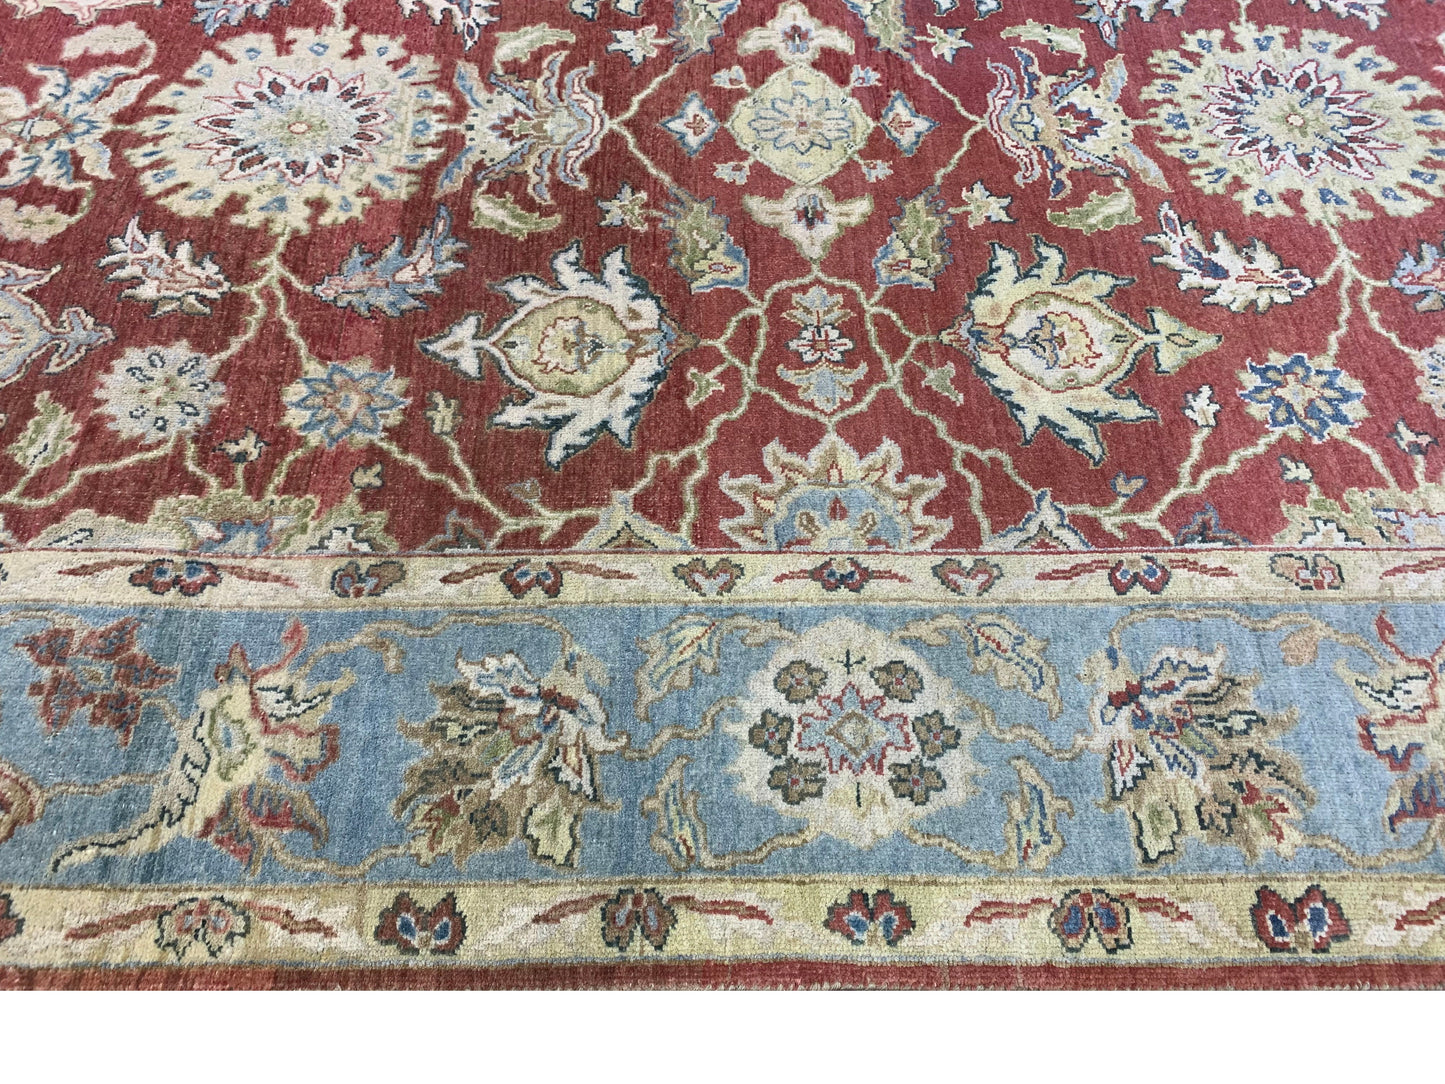 Get trendy with Rust L.Blue Pure Wool Traditional Luxury Handknotted Area Rug 3.10x5.10ft 117x177Cms - Contemporary Rugs available at Jaipur Oriental Rugs. Grab yours for $1115.00 today!